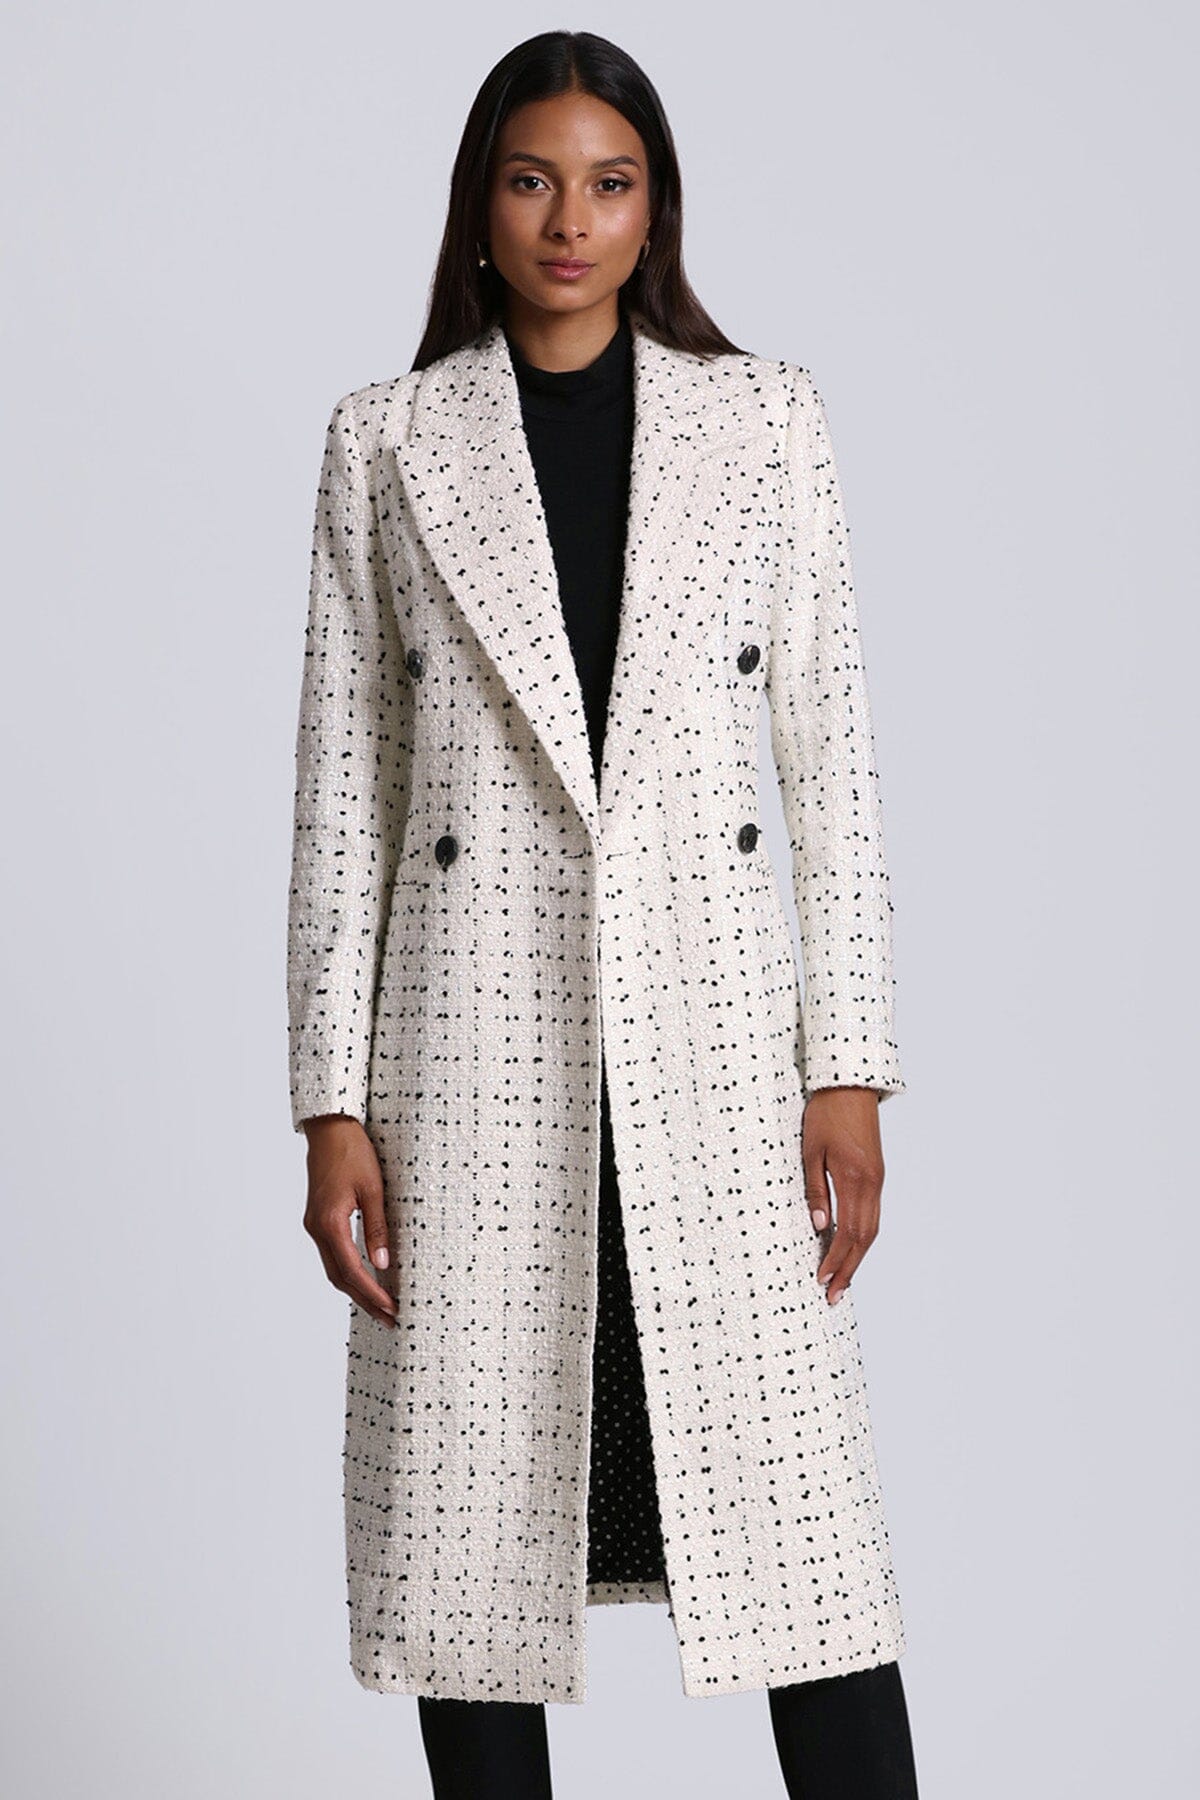 Tweed Tailored Double-Breasted Coat Coats & Jackets Avec Les Filles White/Black L 